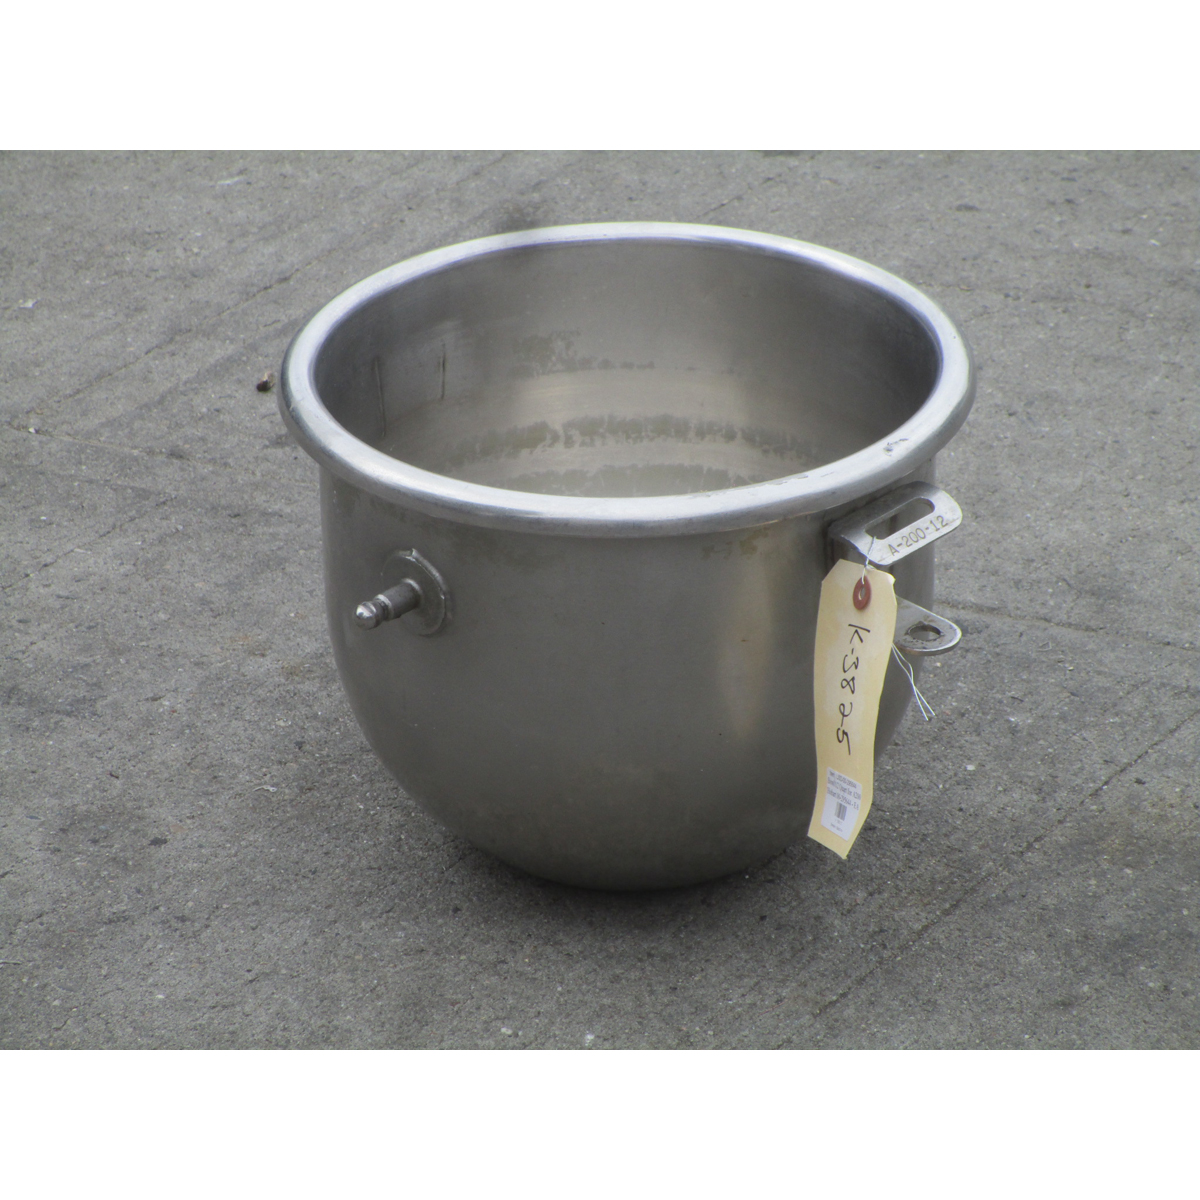 Hobart 00-295644 12 Quart Bowl To Fit A200 Mixer, Used Good Condition